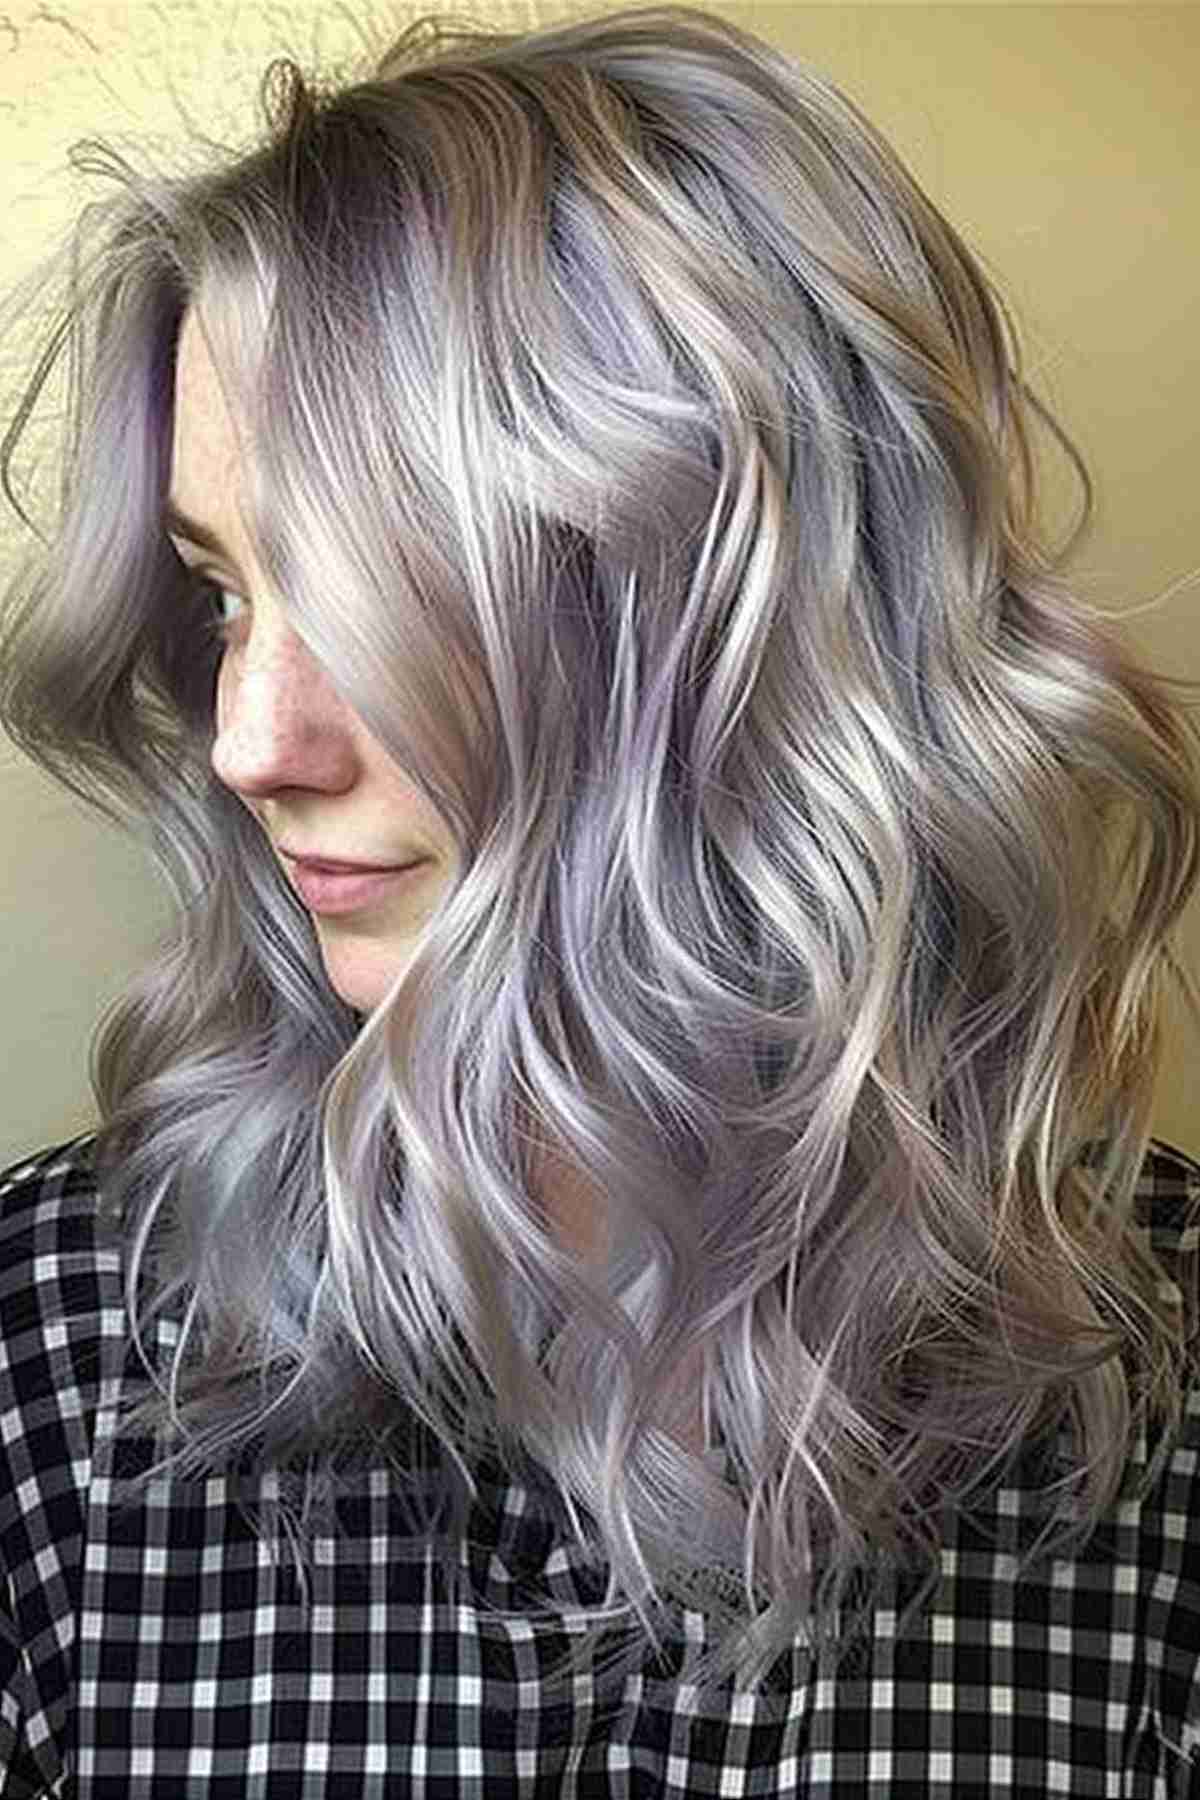 Long wavy hair showcasing a blend of natural and silver mauve hues, ideal for adding volume and a modern twist to traditional silver color ideas.